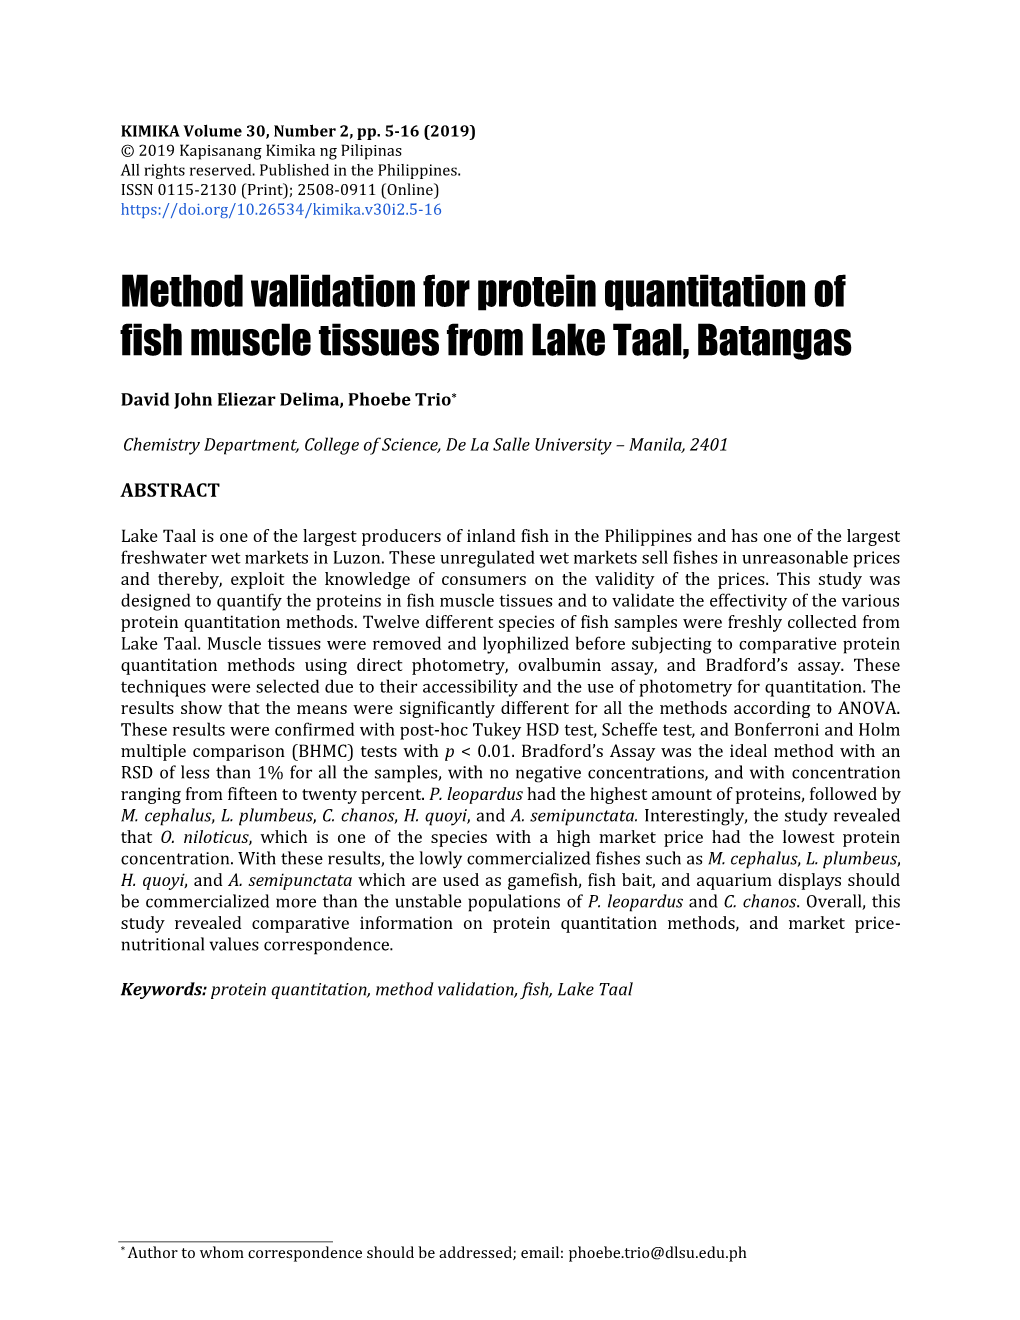 Method Validation for Protein Quantitation of Fish Muscle Tissues from Lake Taal, Batangas